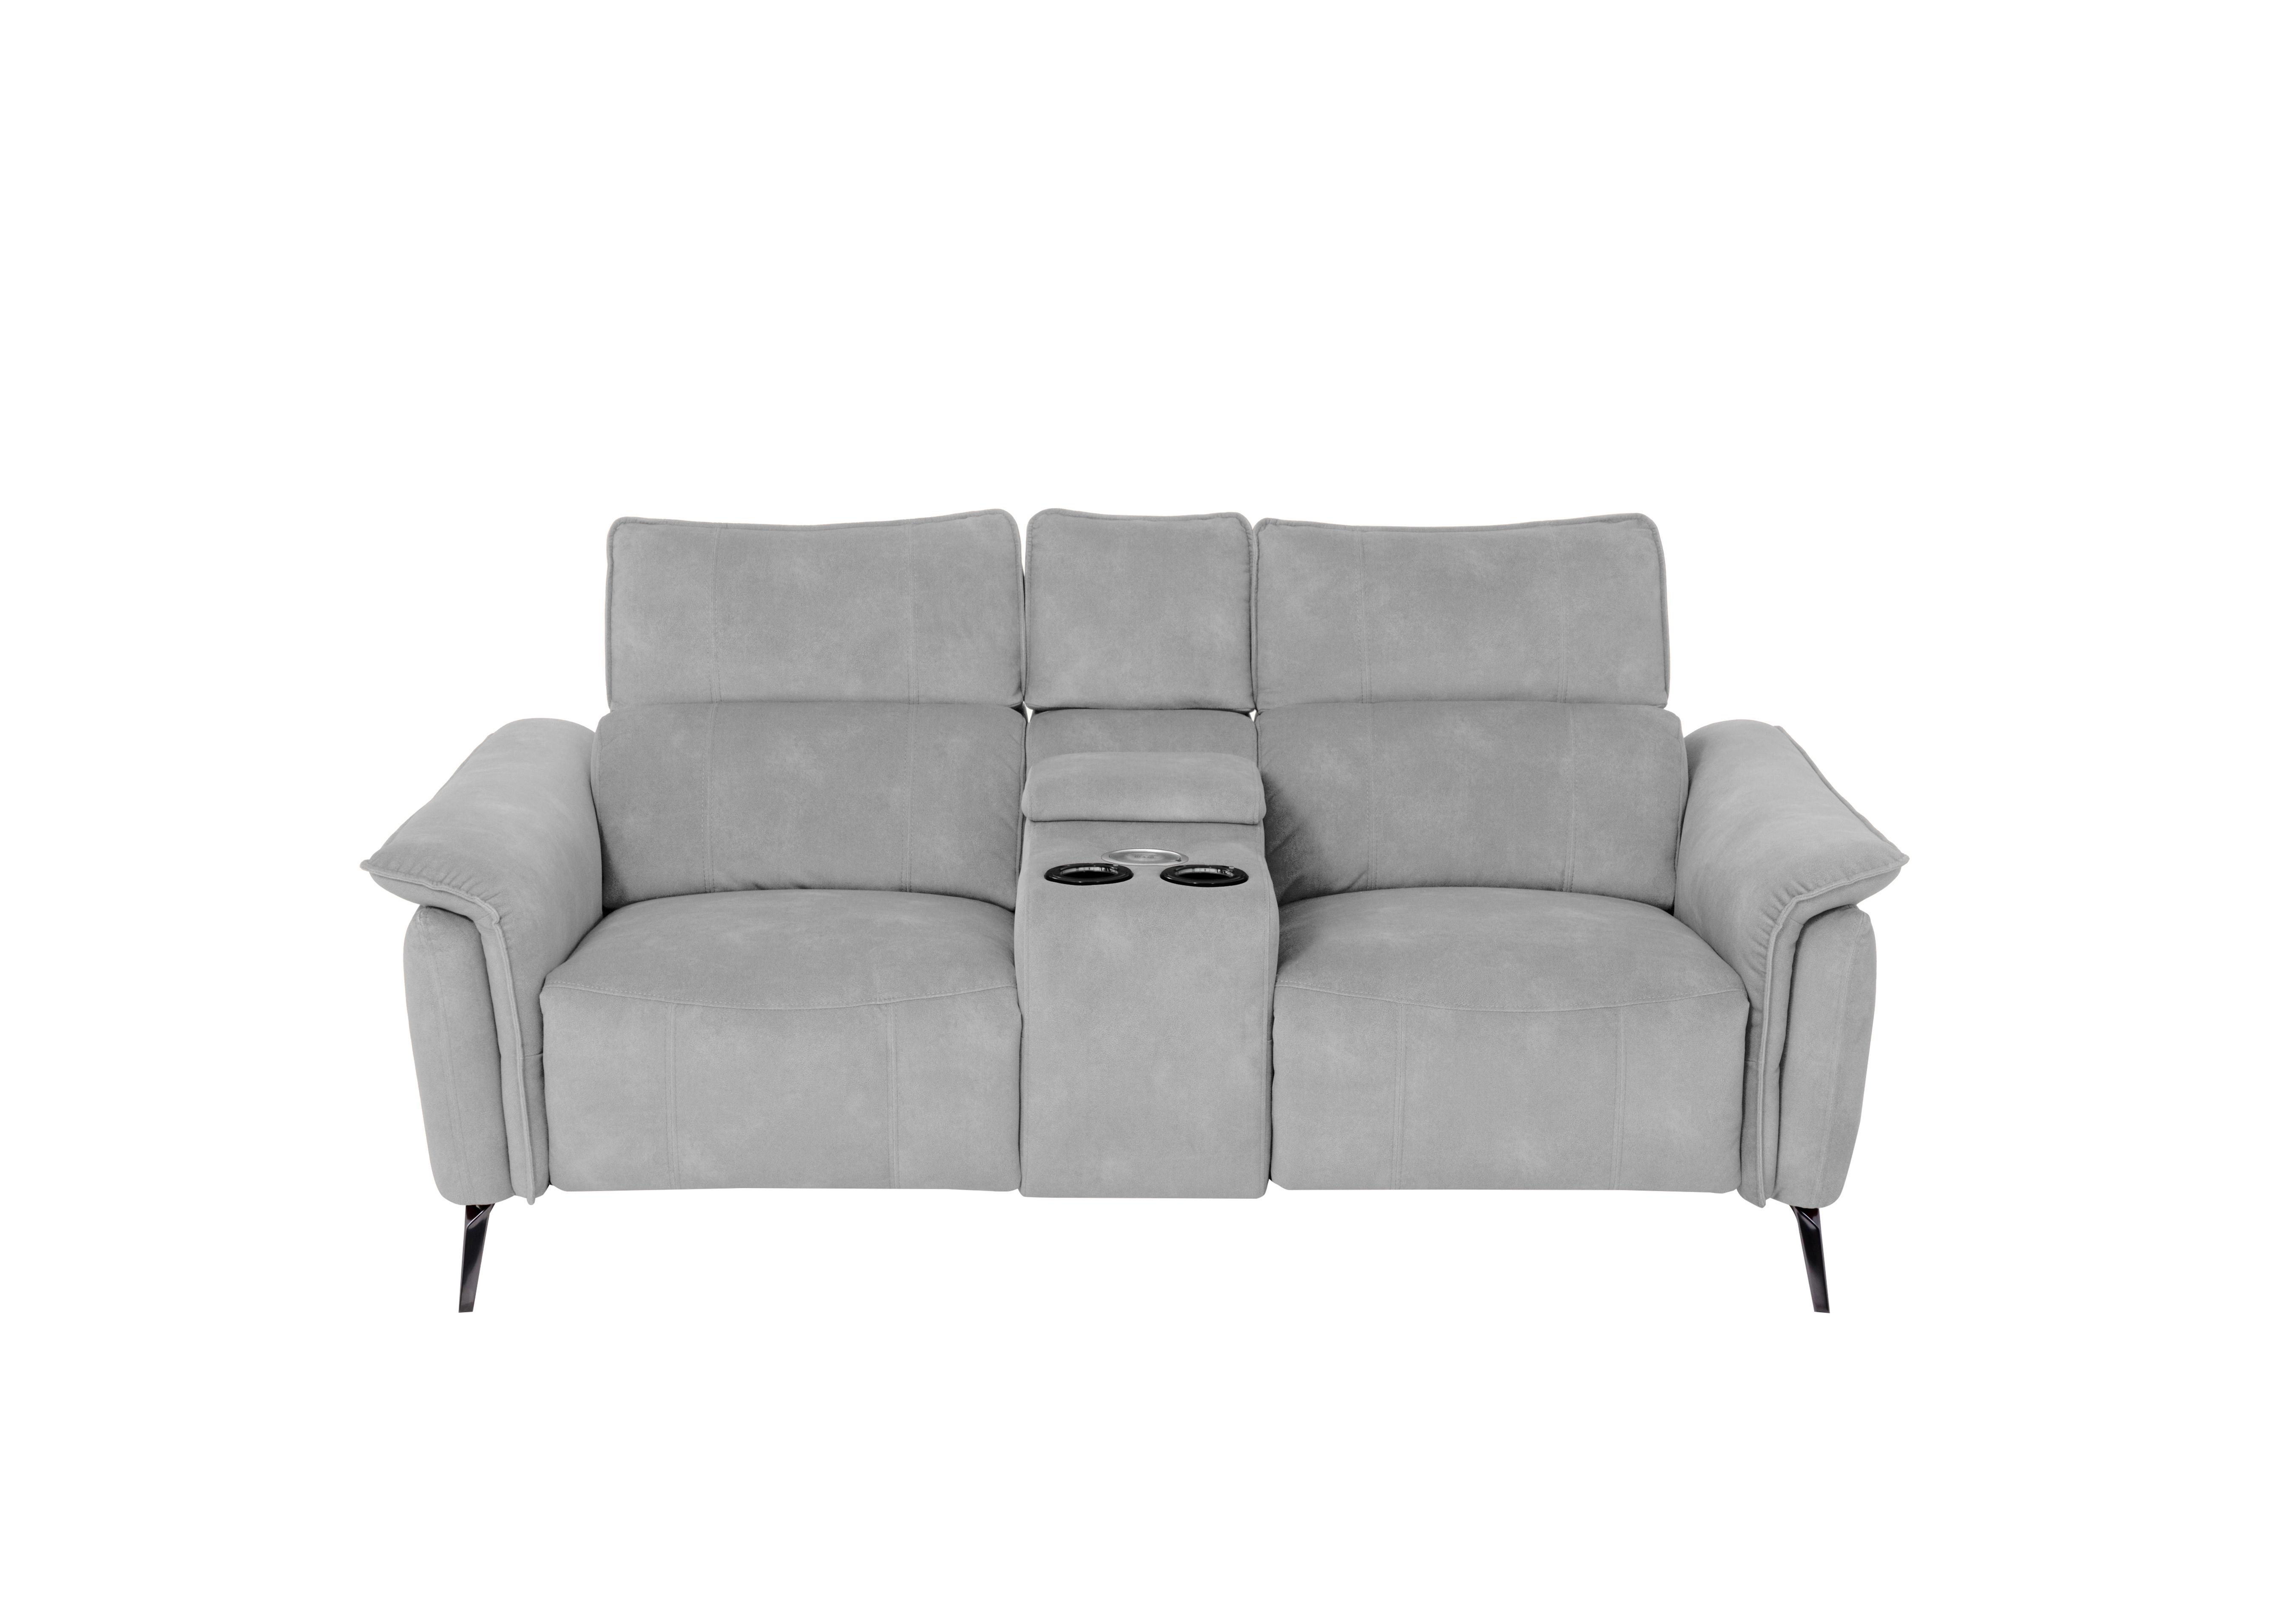 Jude 2 Seater Fabric Power Recliner Sofa with Smart Console Unit and Power Telescopic Headrests in Smoke Dexter 16 43516 on Furniture Village